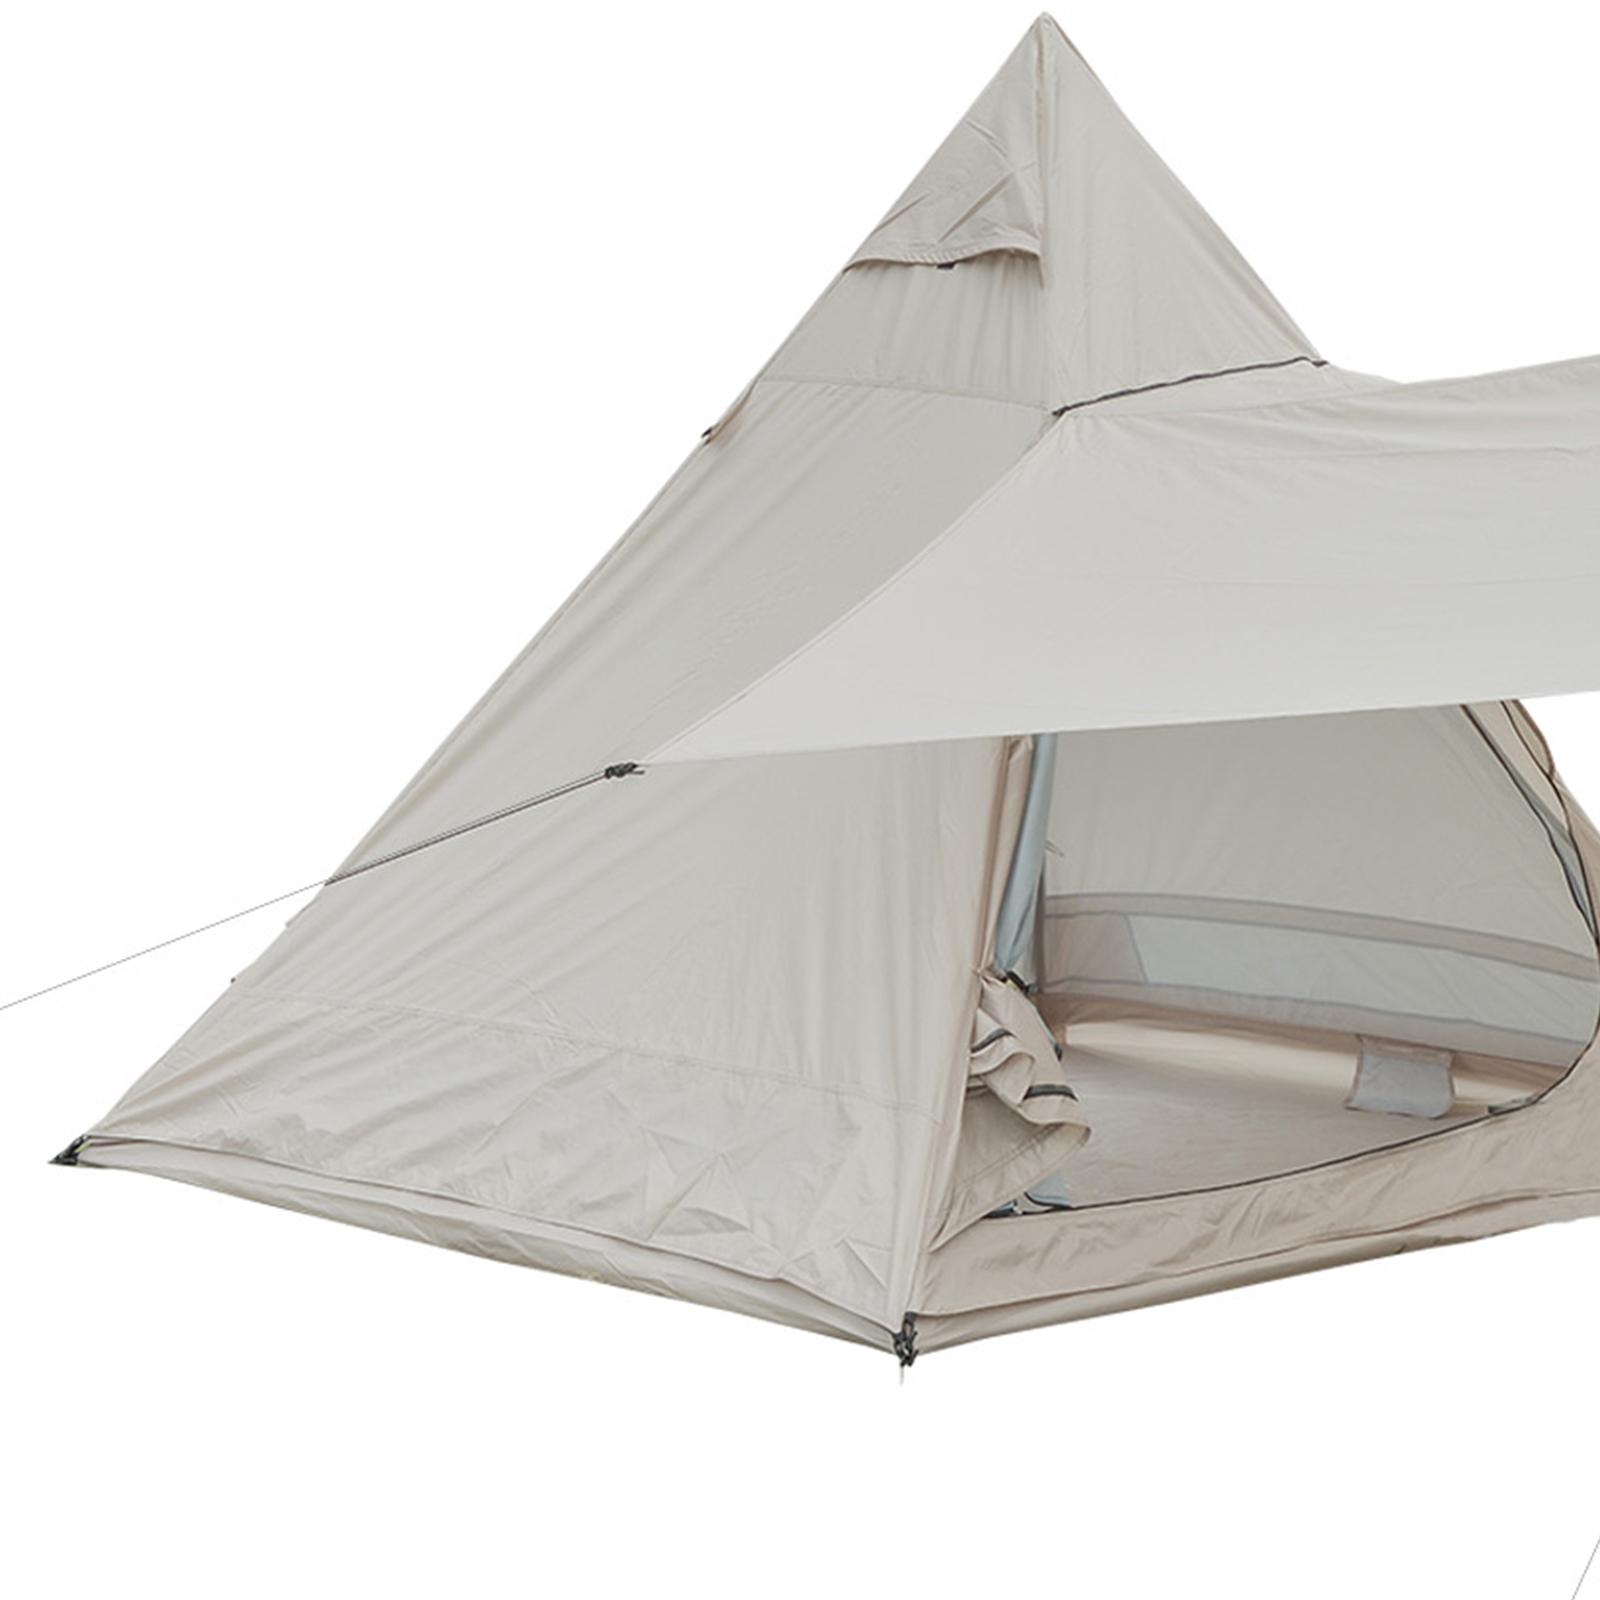 Camping Tent with Canopy Waterproof Shelter for Outdoor Travel